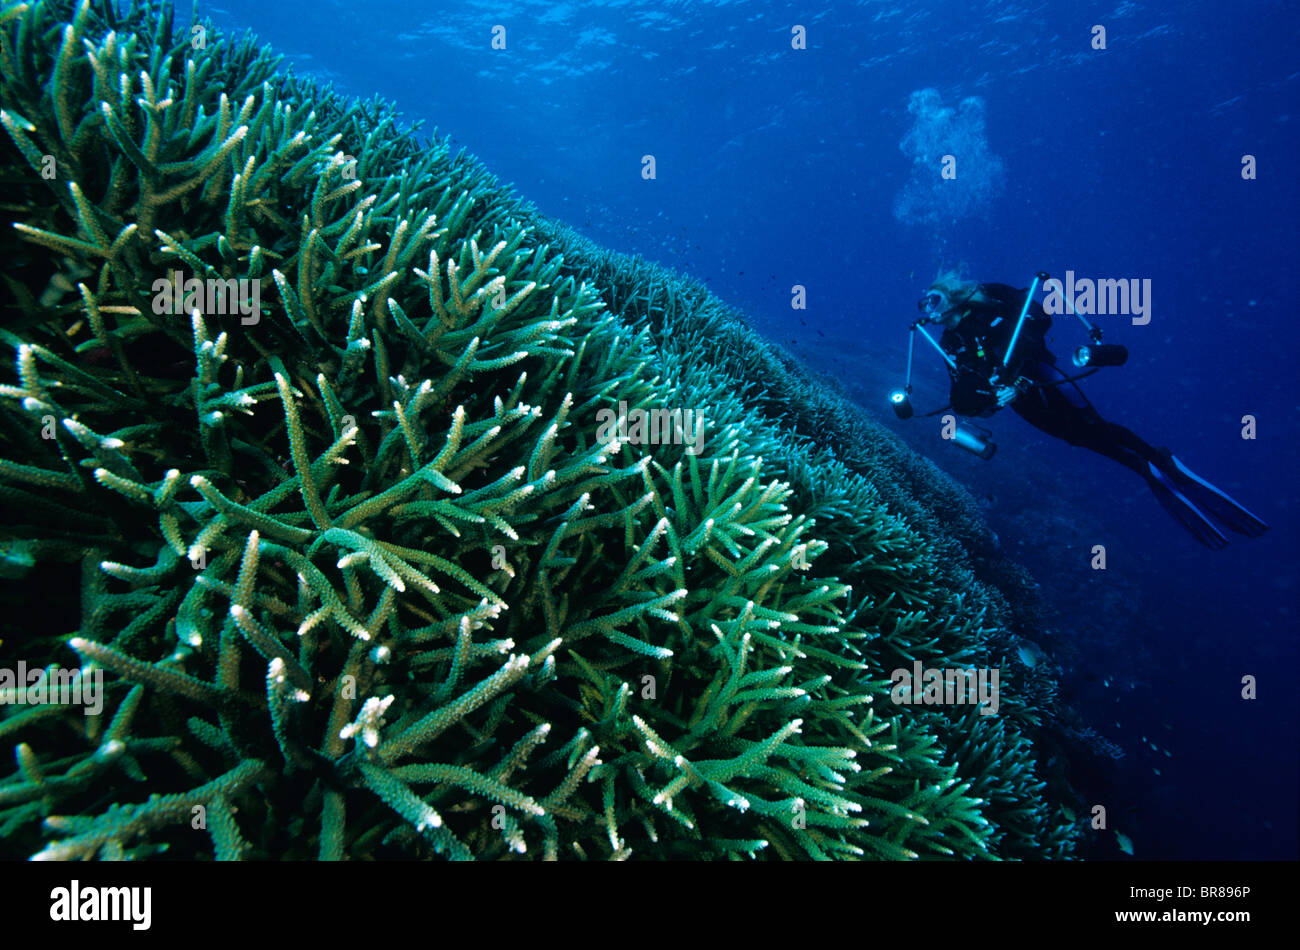 Scuba diver with corals (Acropora sp), New Ireland, Papua New Guinea Model released. Stock Photo